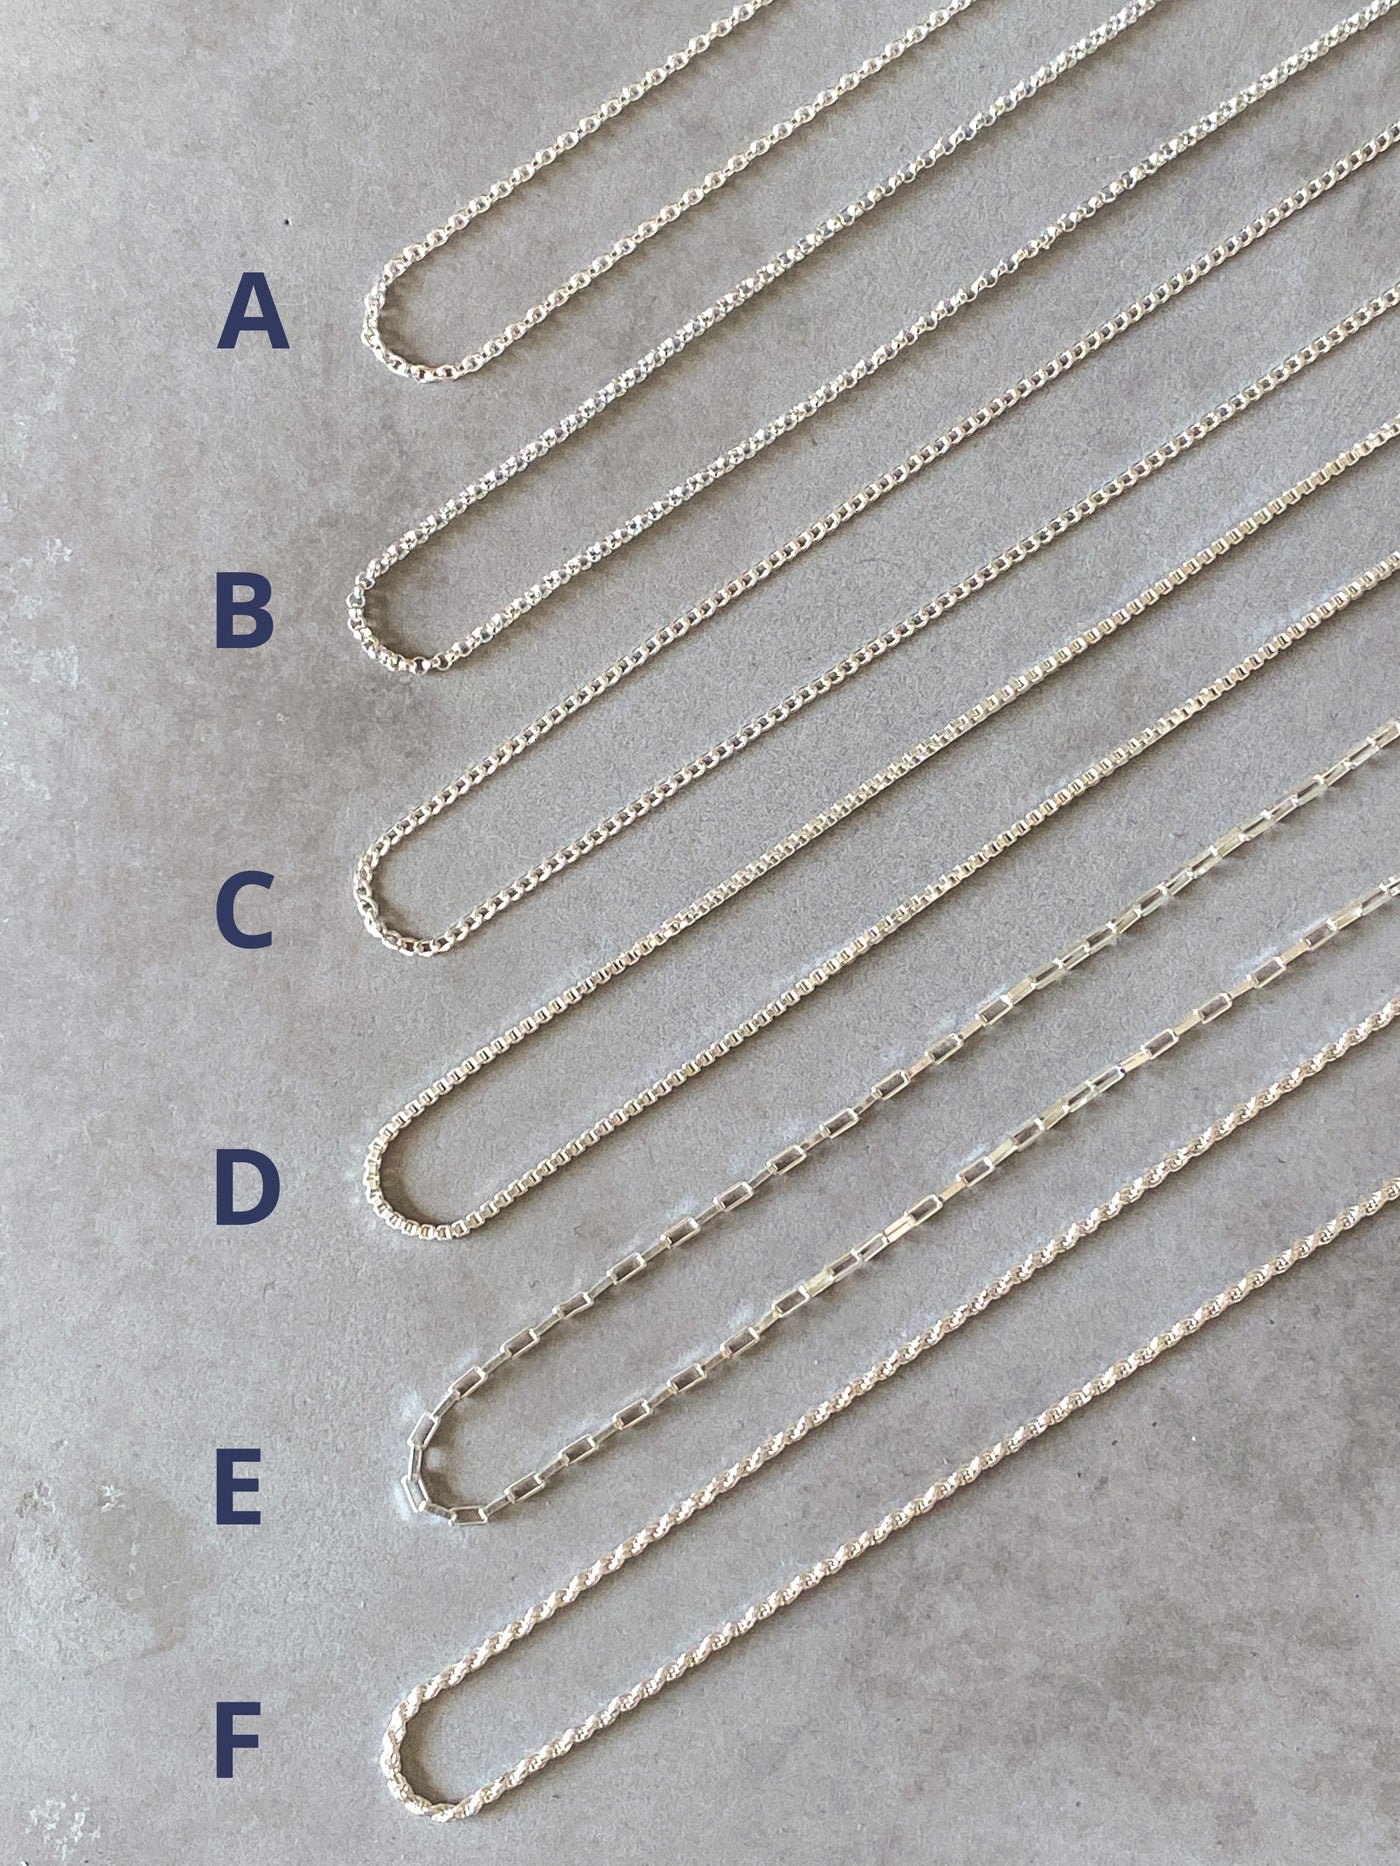 Sterling silver chain options